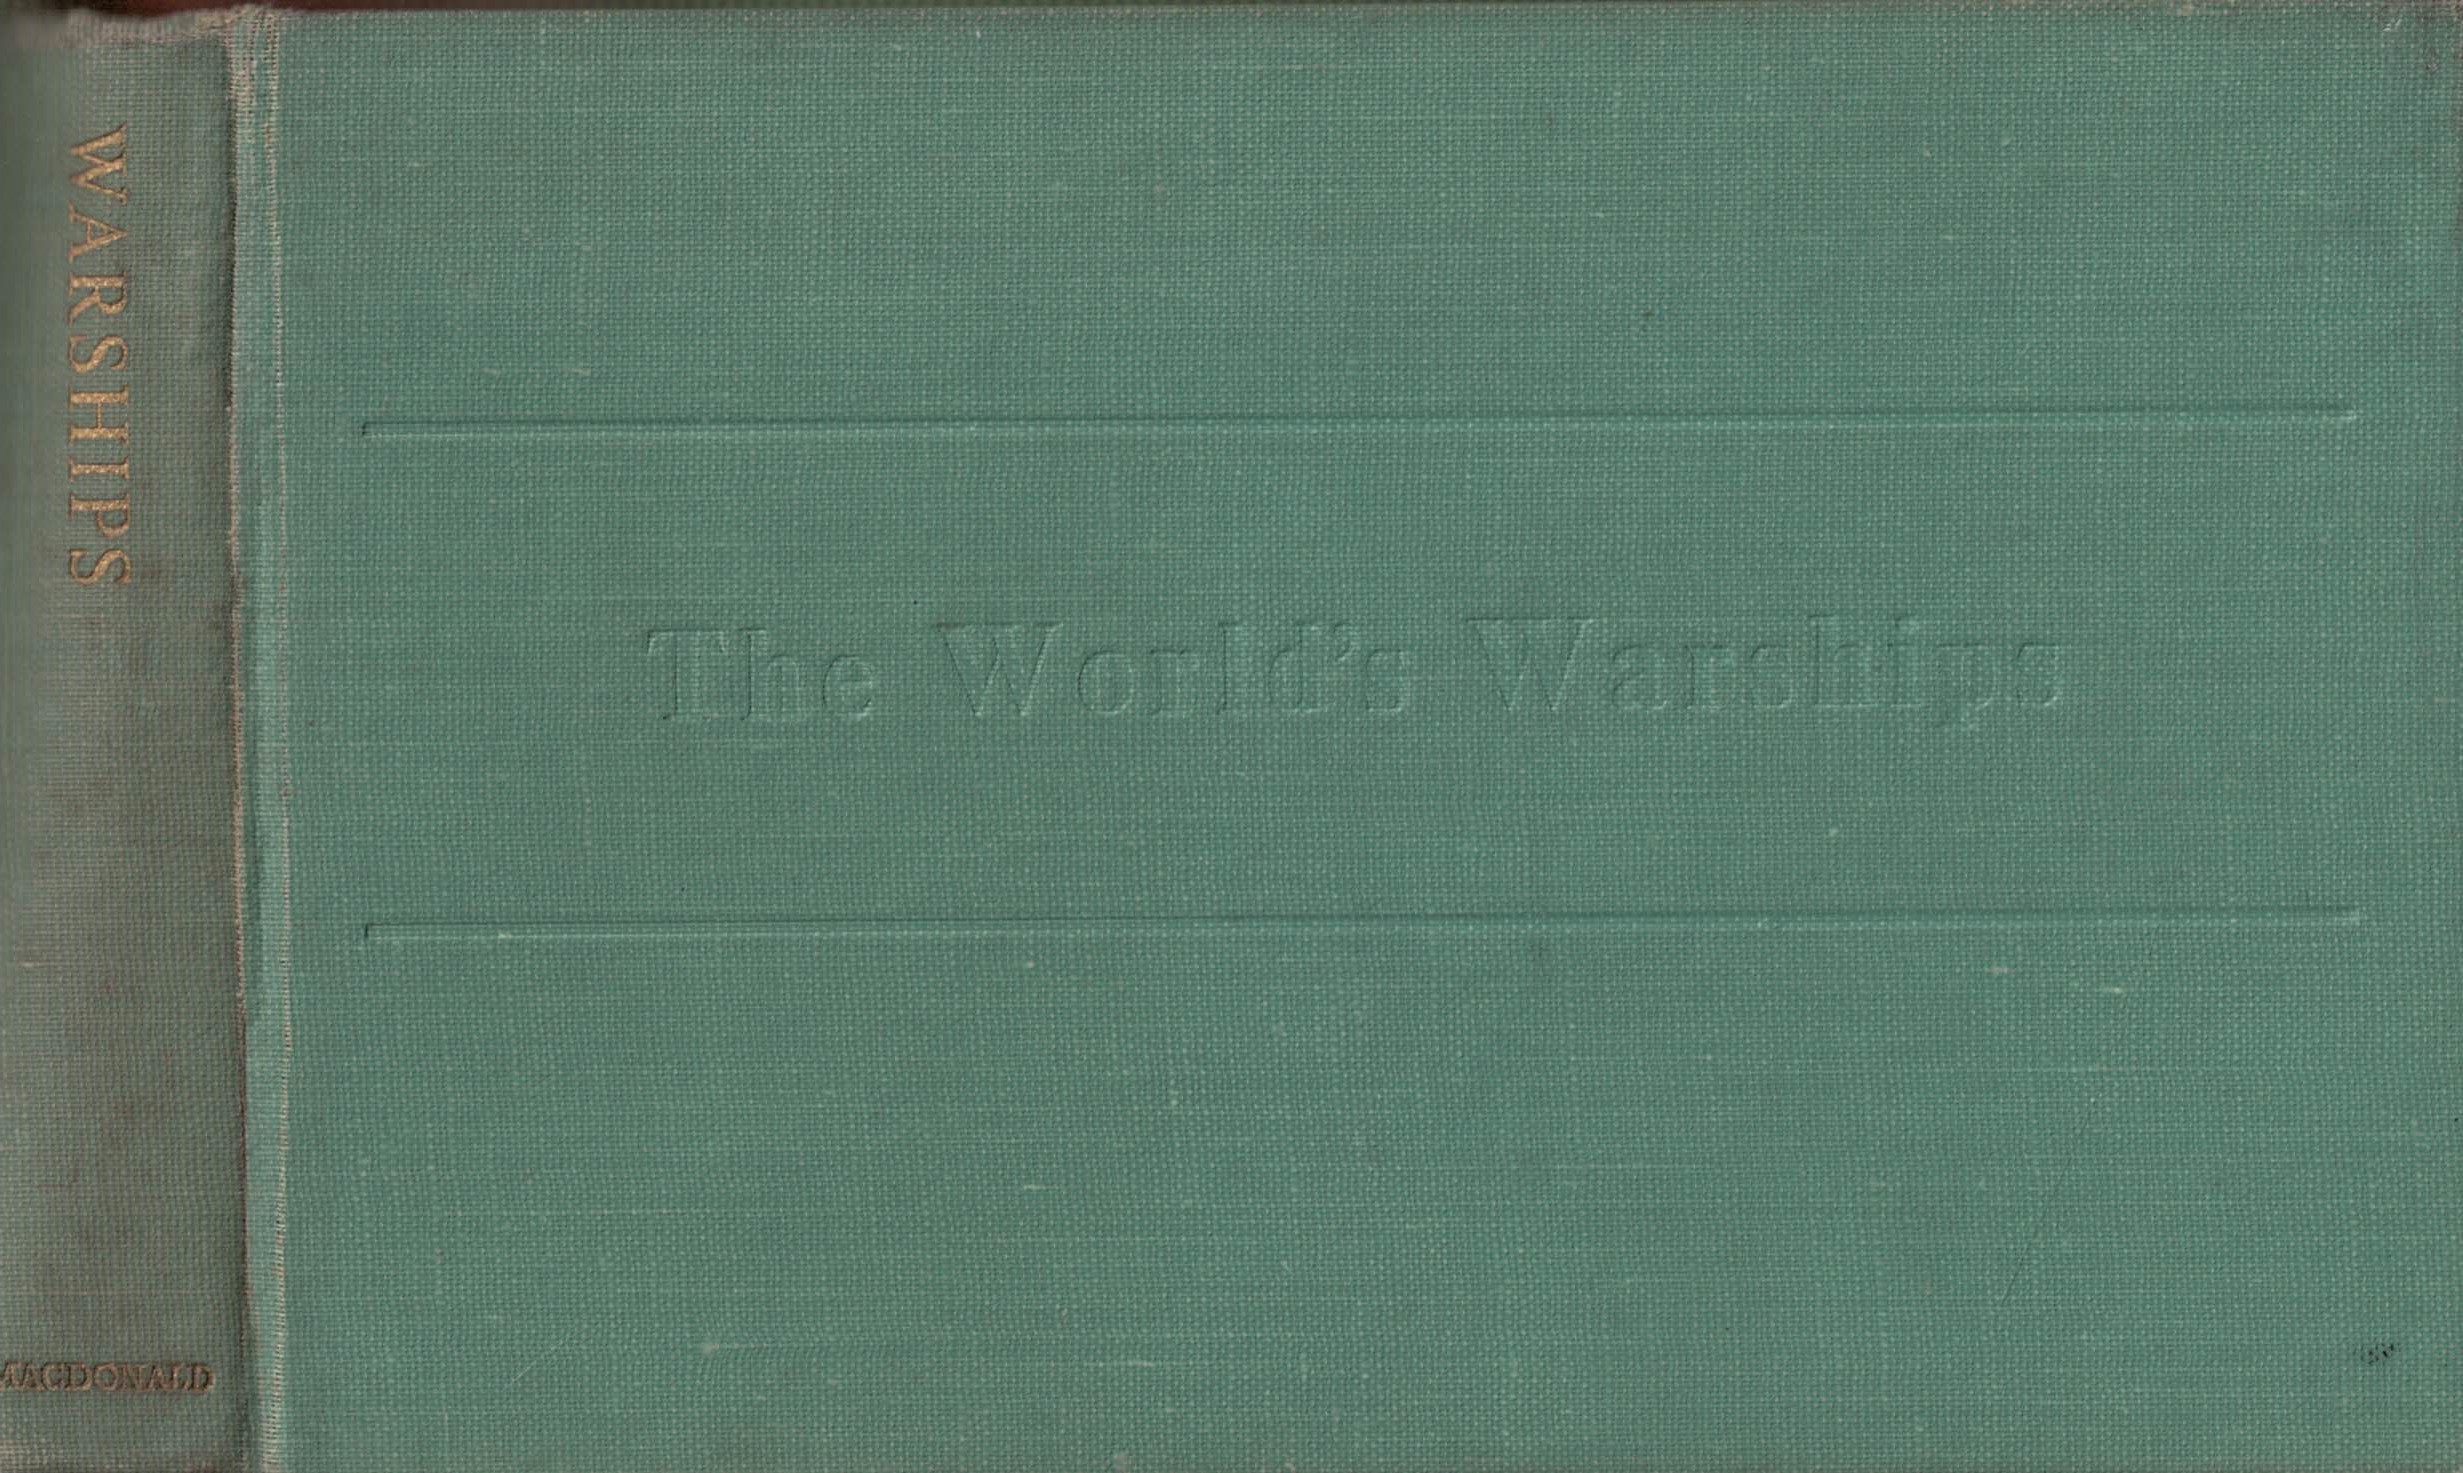 The World's Warships. 1963 edition.